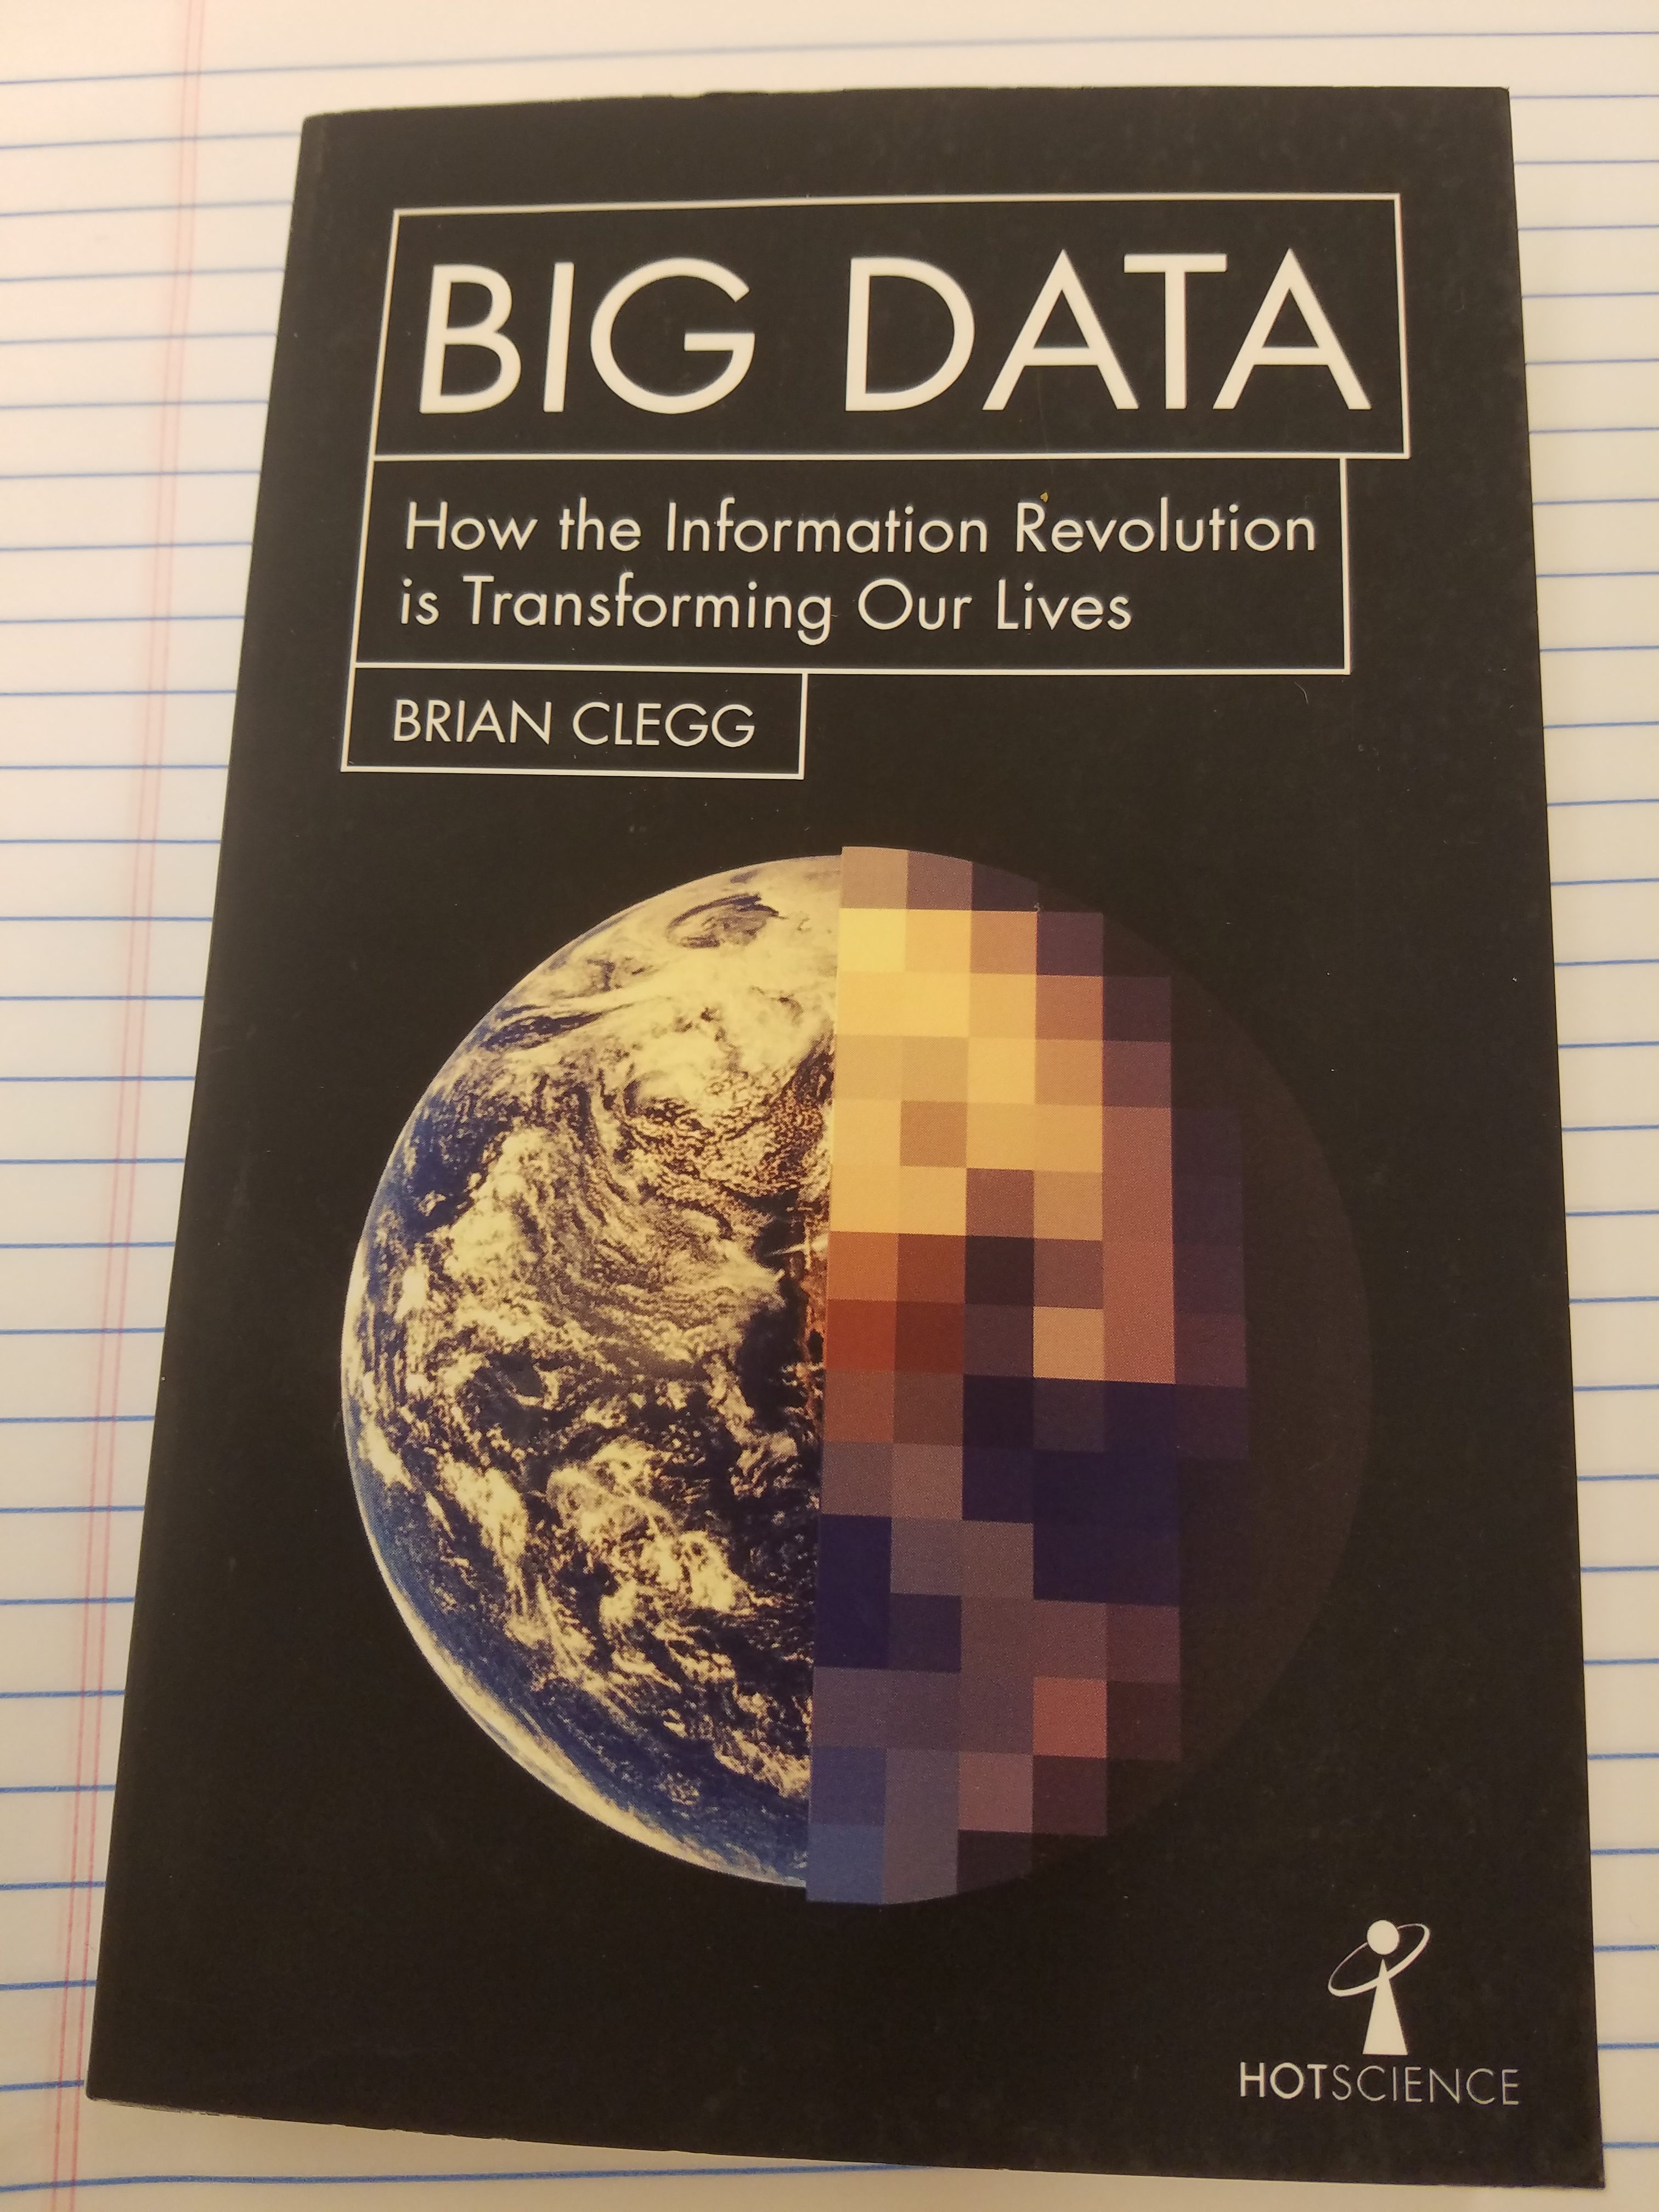 Quick Review: Big Data, by Brian Clegg